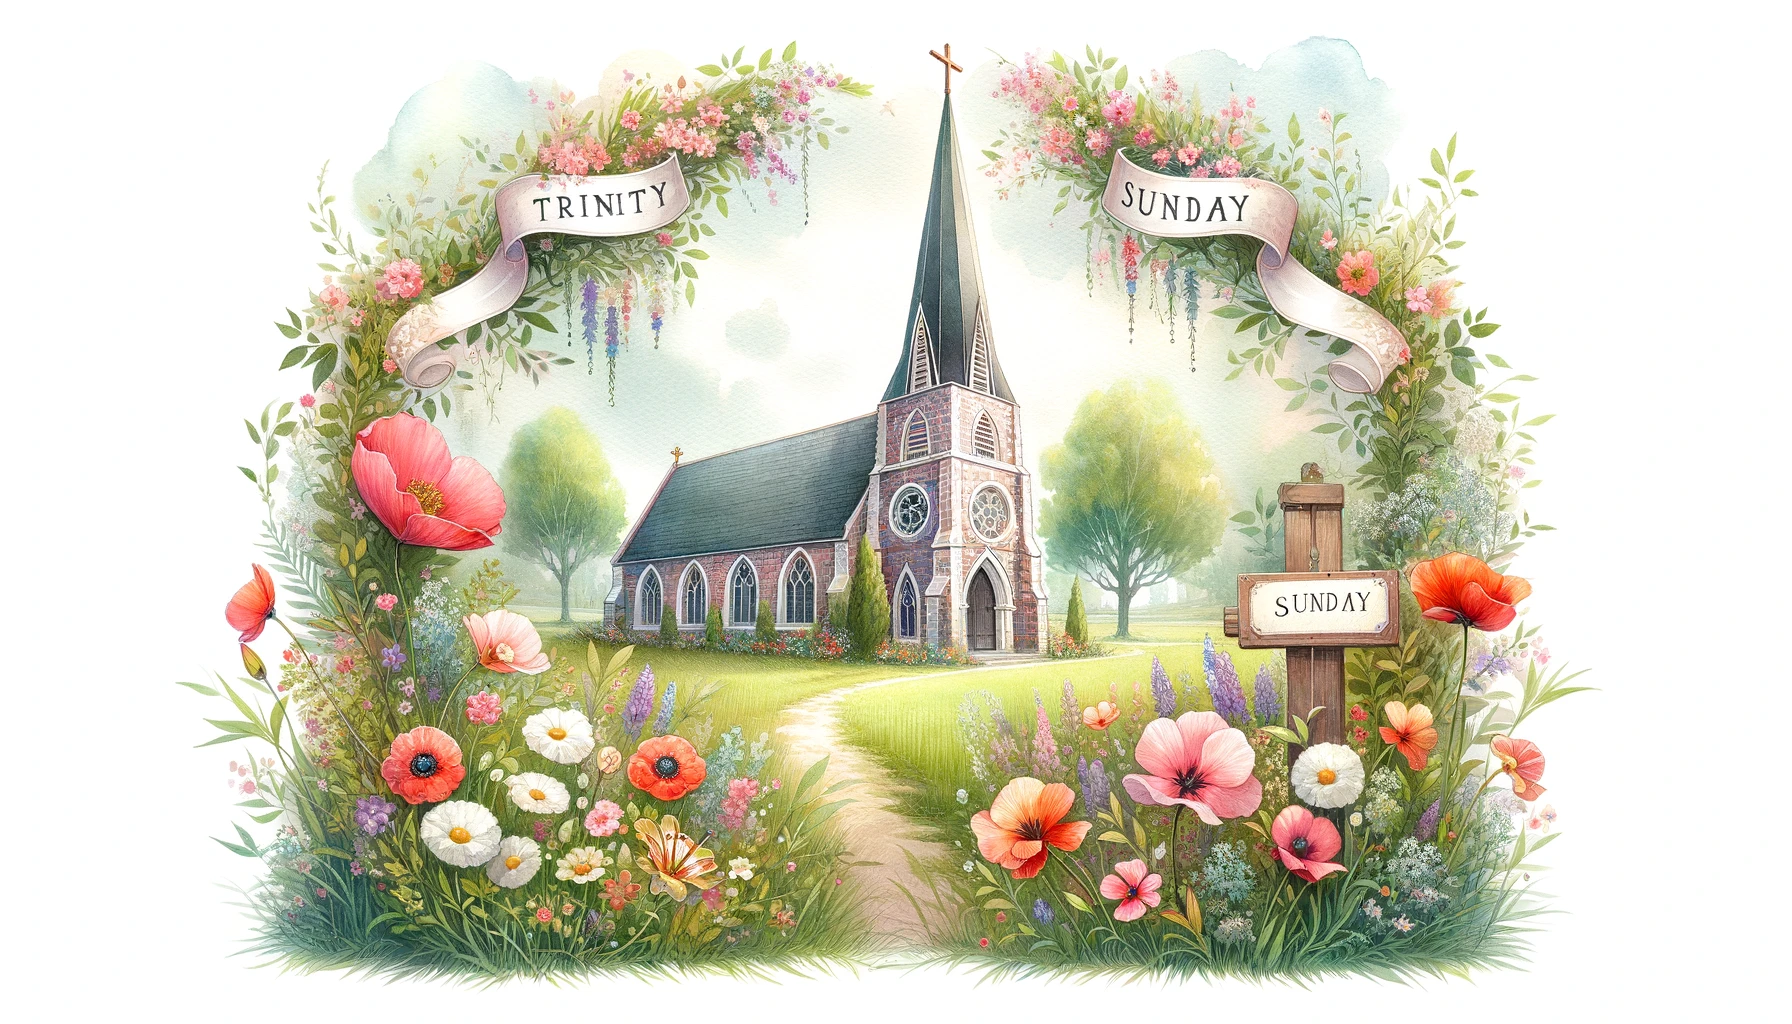 Personalized Trinity Sunday Messages for Everyone